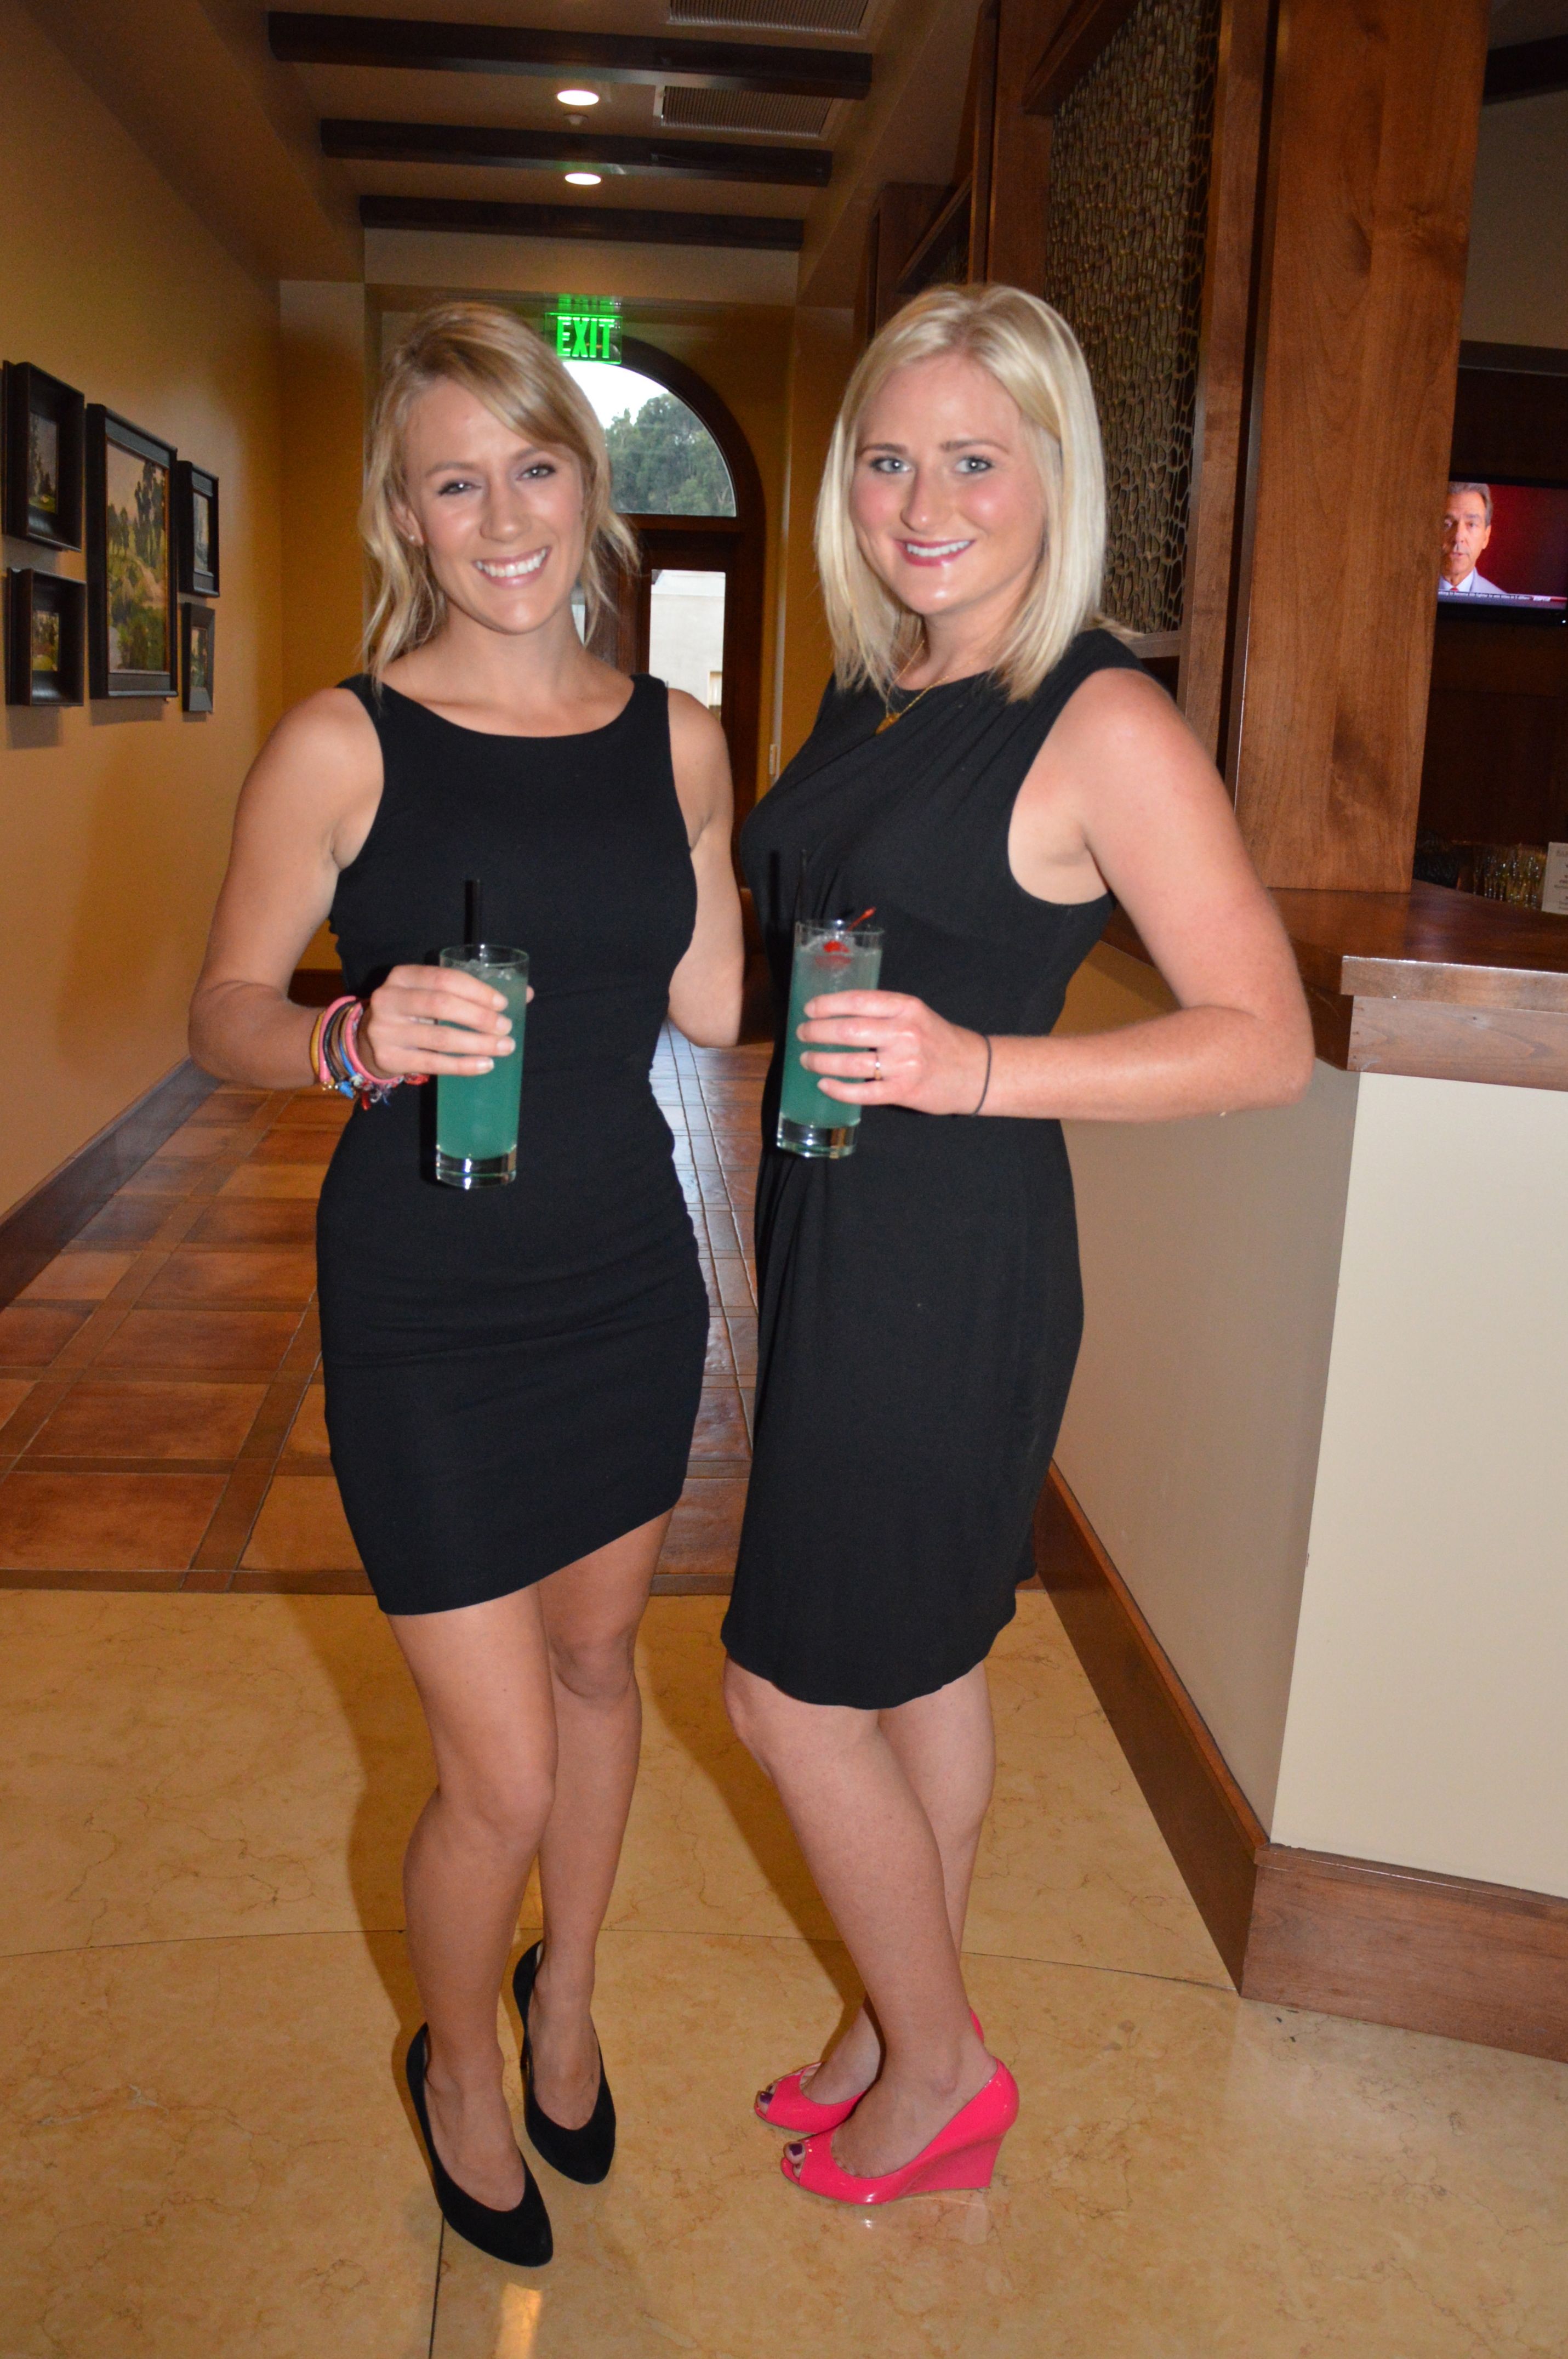 Emily Shannon and Lizzy Foxley greet guests with the signature drink, The Blue Margarita.